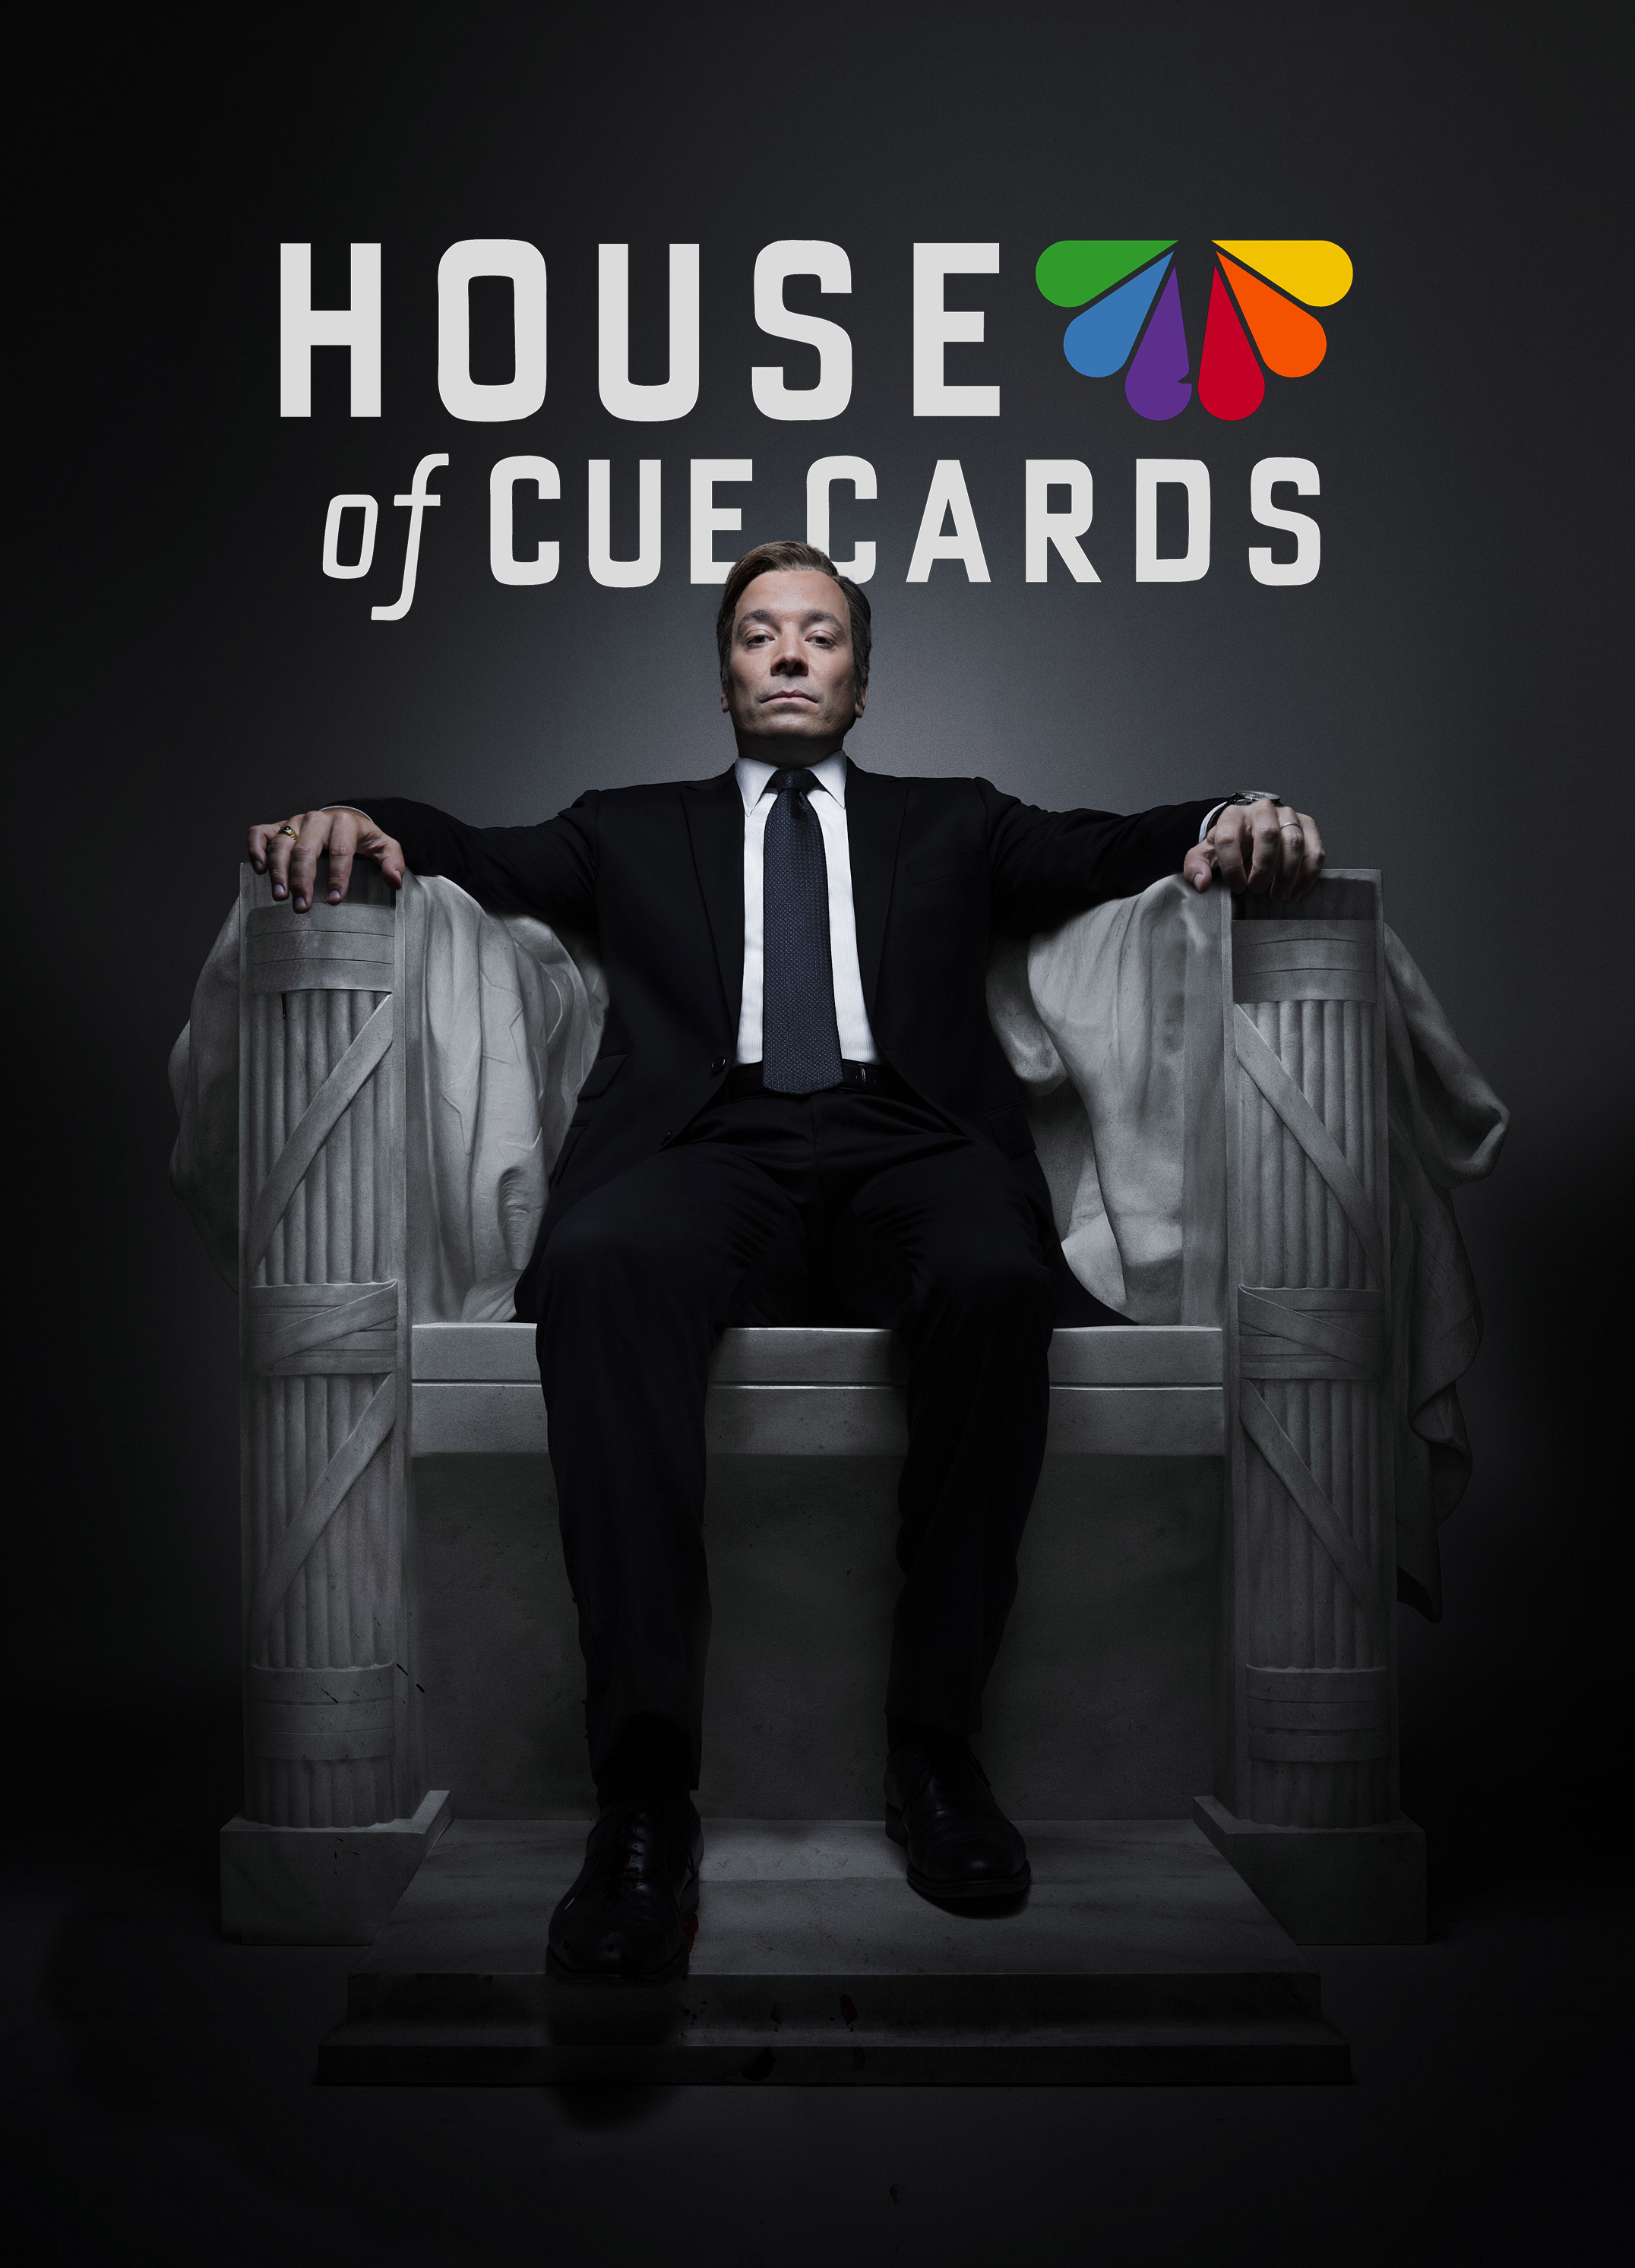 THE TONIGHT SHOW STARRING JIMMY FALLON -- Episode 0106 -- Pictured: "House of Cue Cards" key art -- (Photo by: Douglas Gorenstein/NBC/NBCU Photo Bank via Getty Images) (NBC/Getty Images)